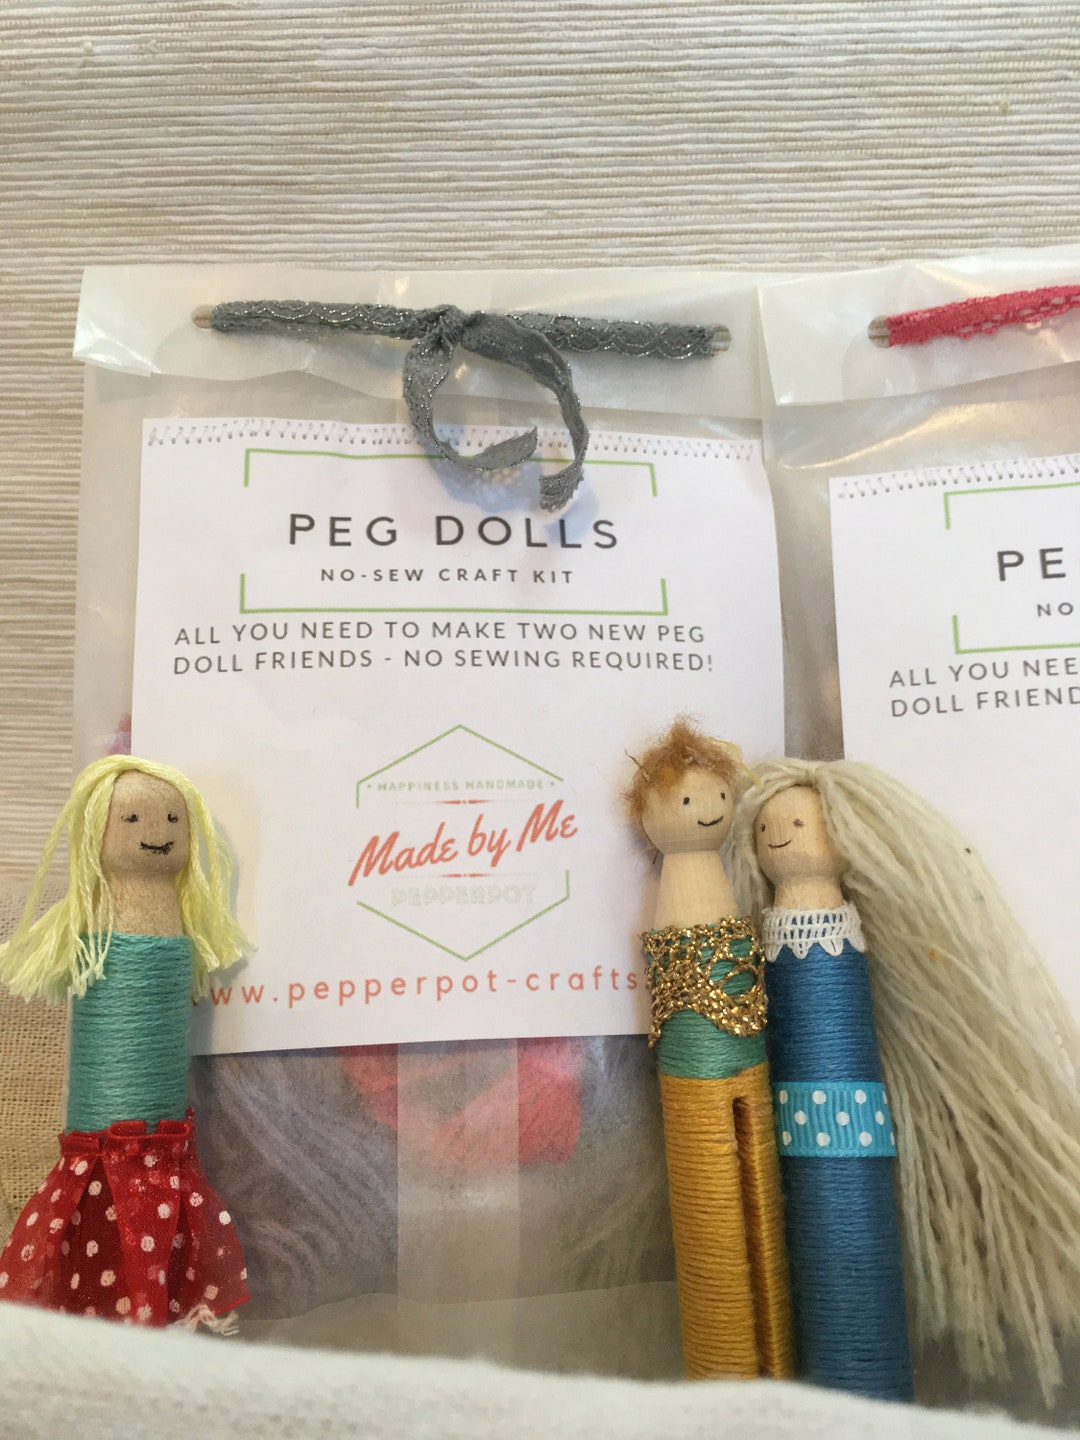 Get creative with a doll making kit and sew your own doll. - PepperPot  Crafts